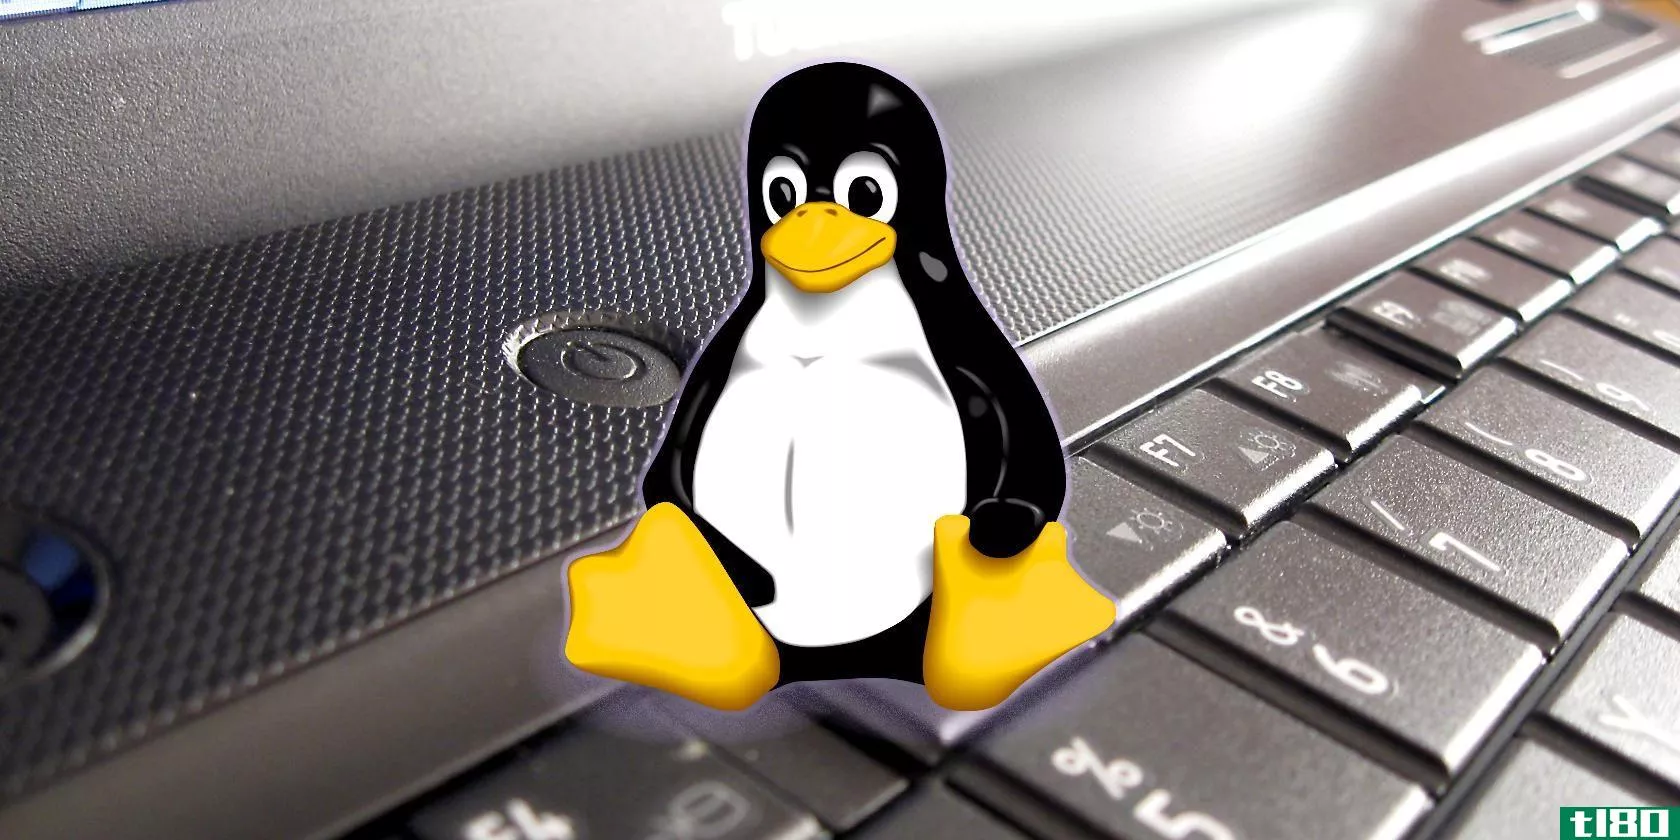 linux-of-a-laptop